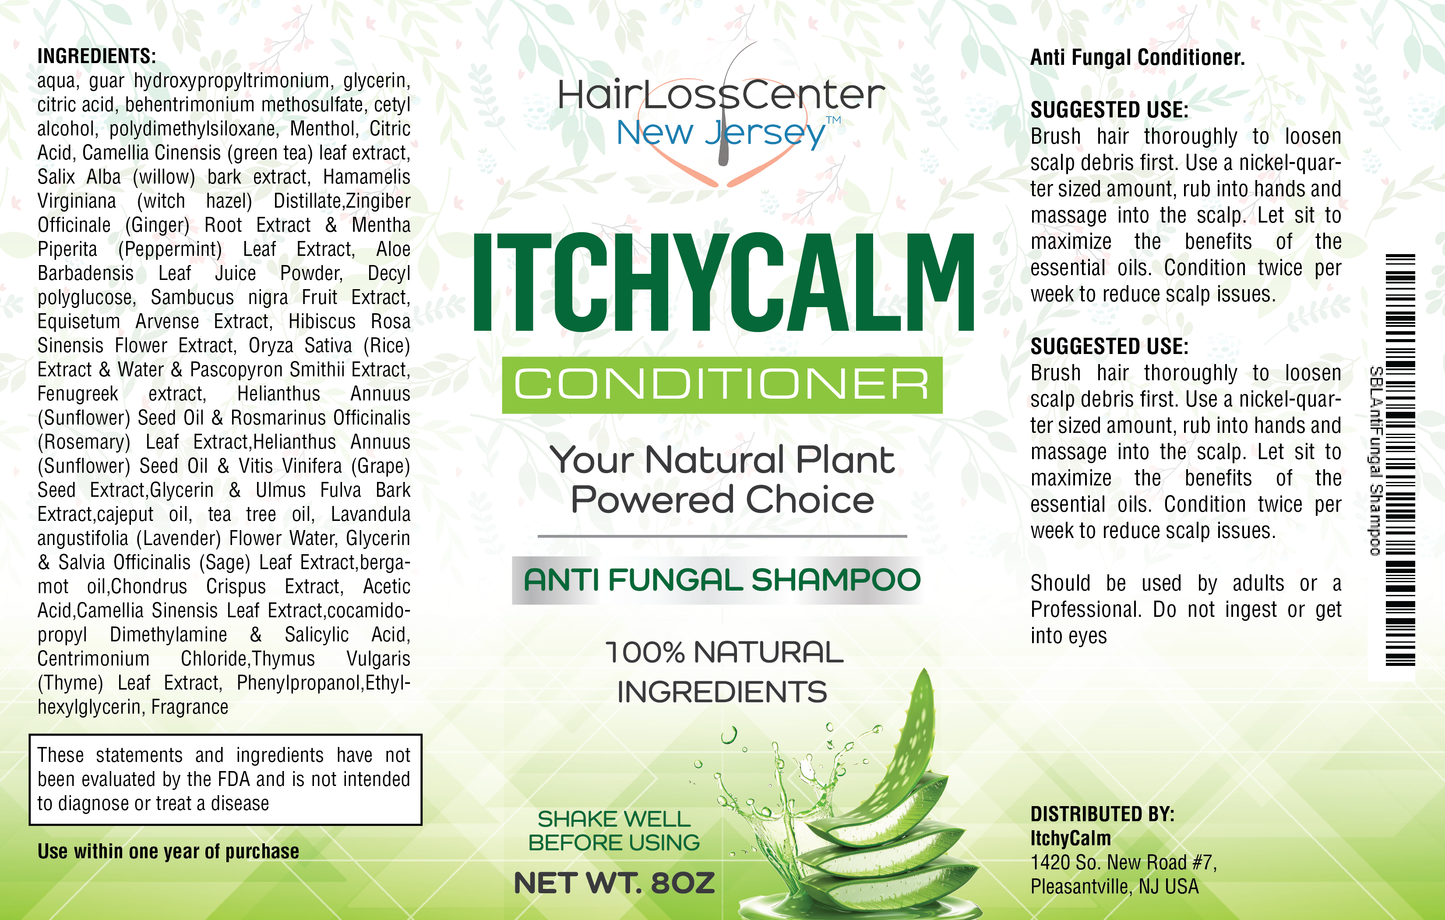 Itchy Calm Scalp Conditioner